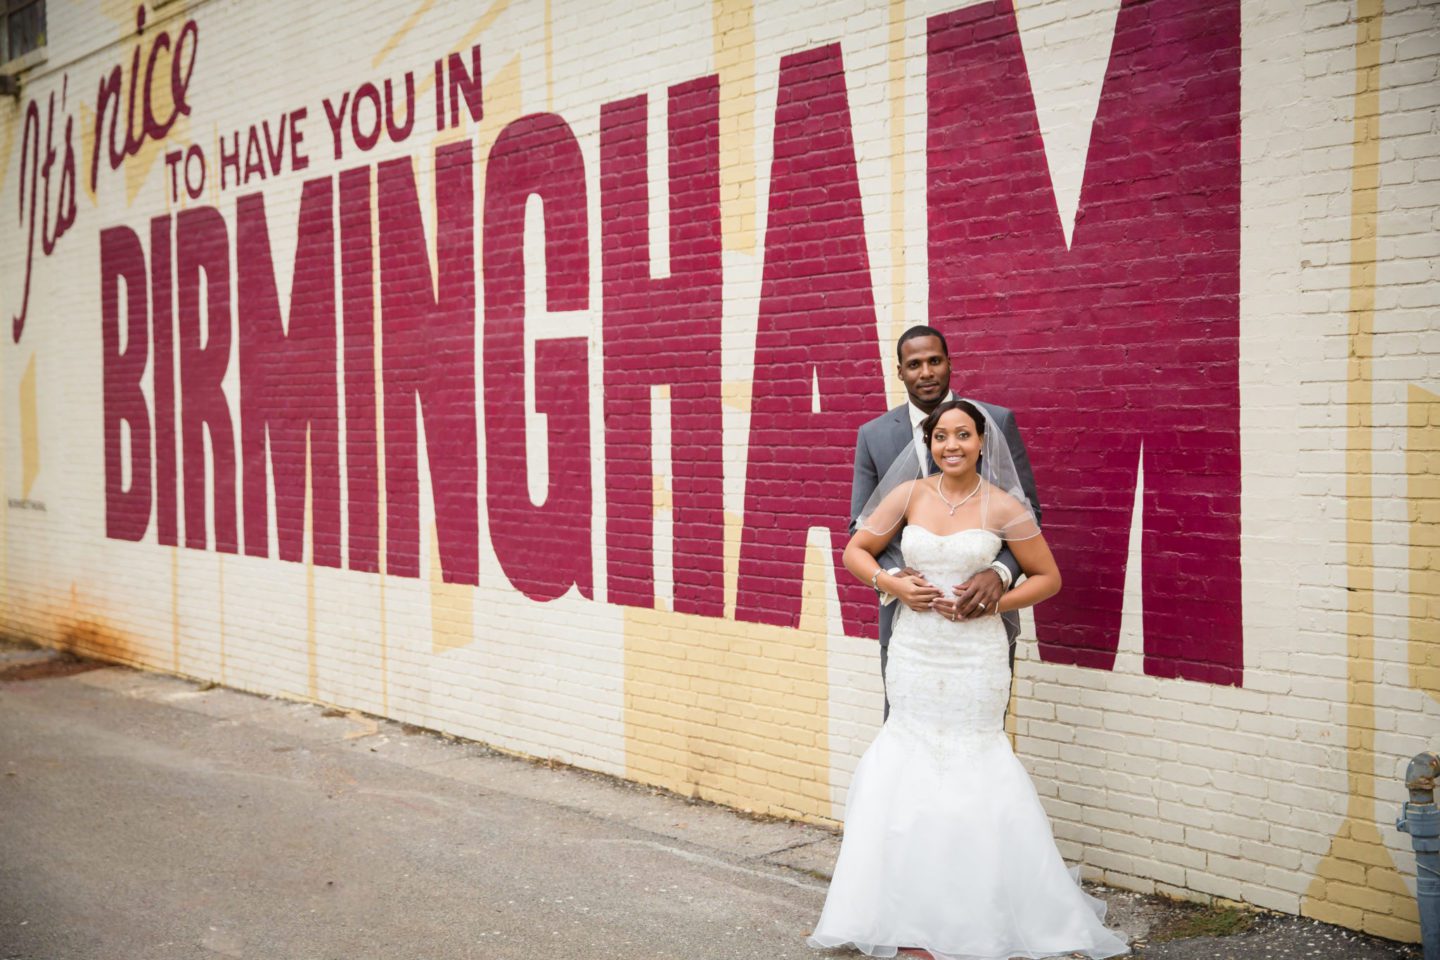 Southern Couple Ties the Knot in Birmingham 12